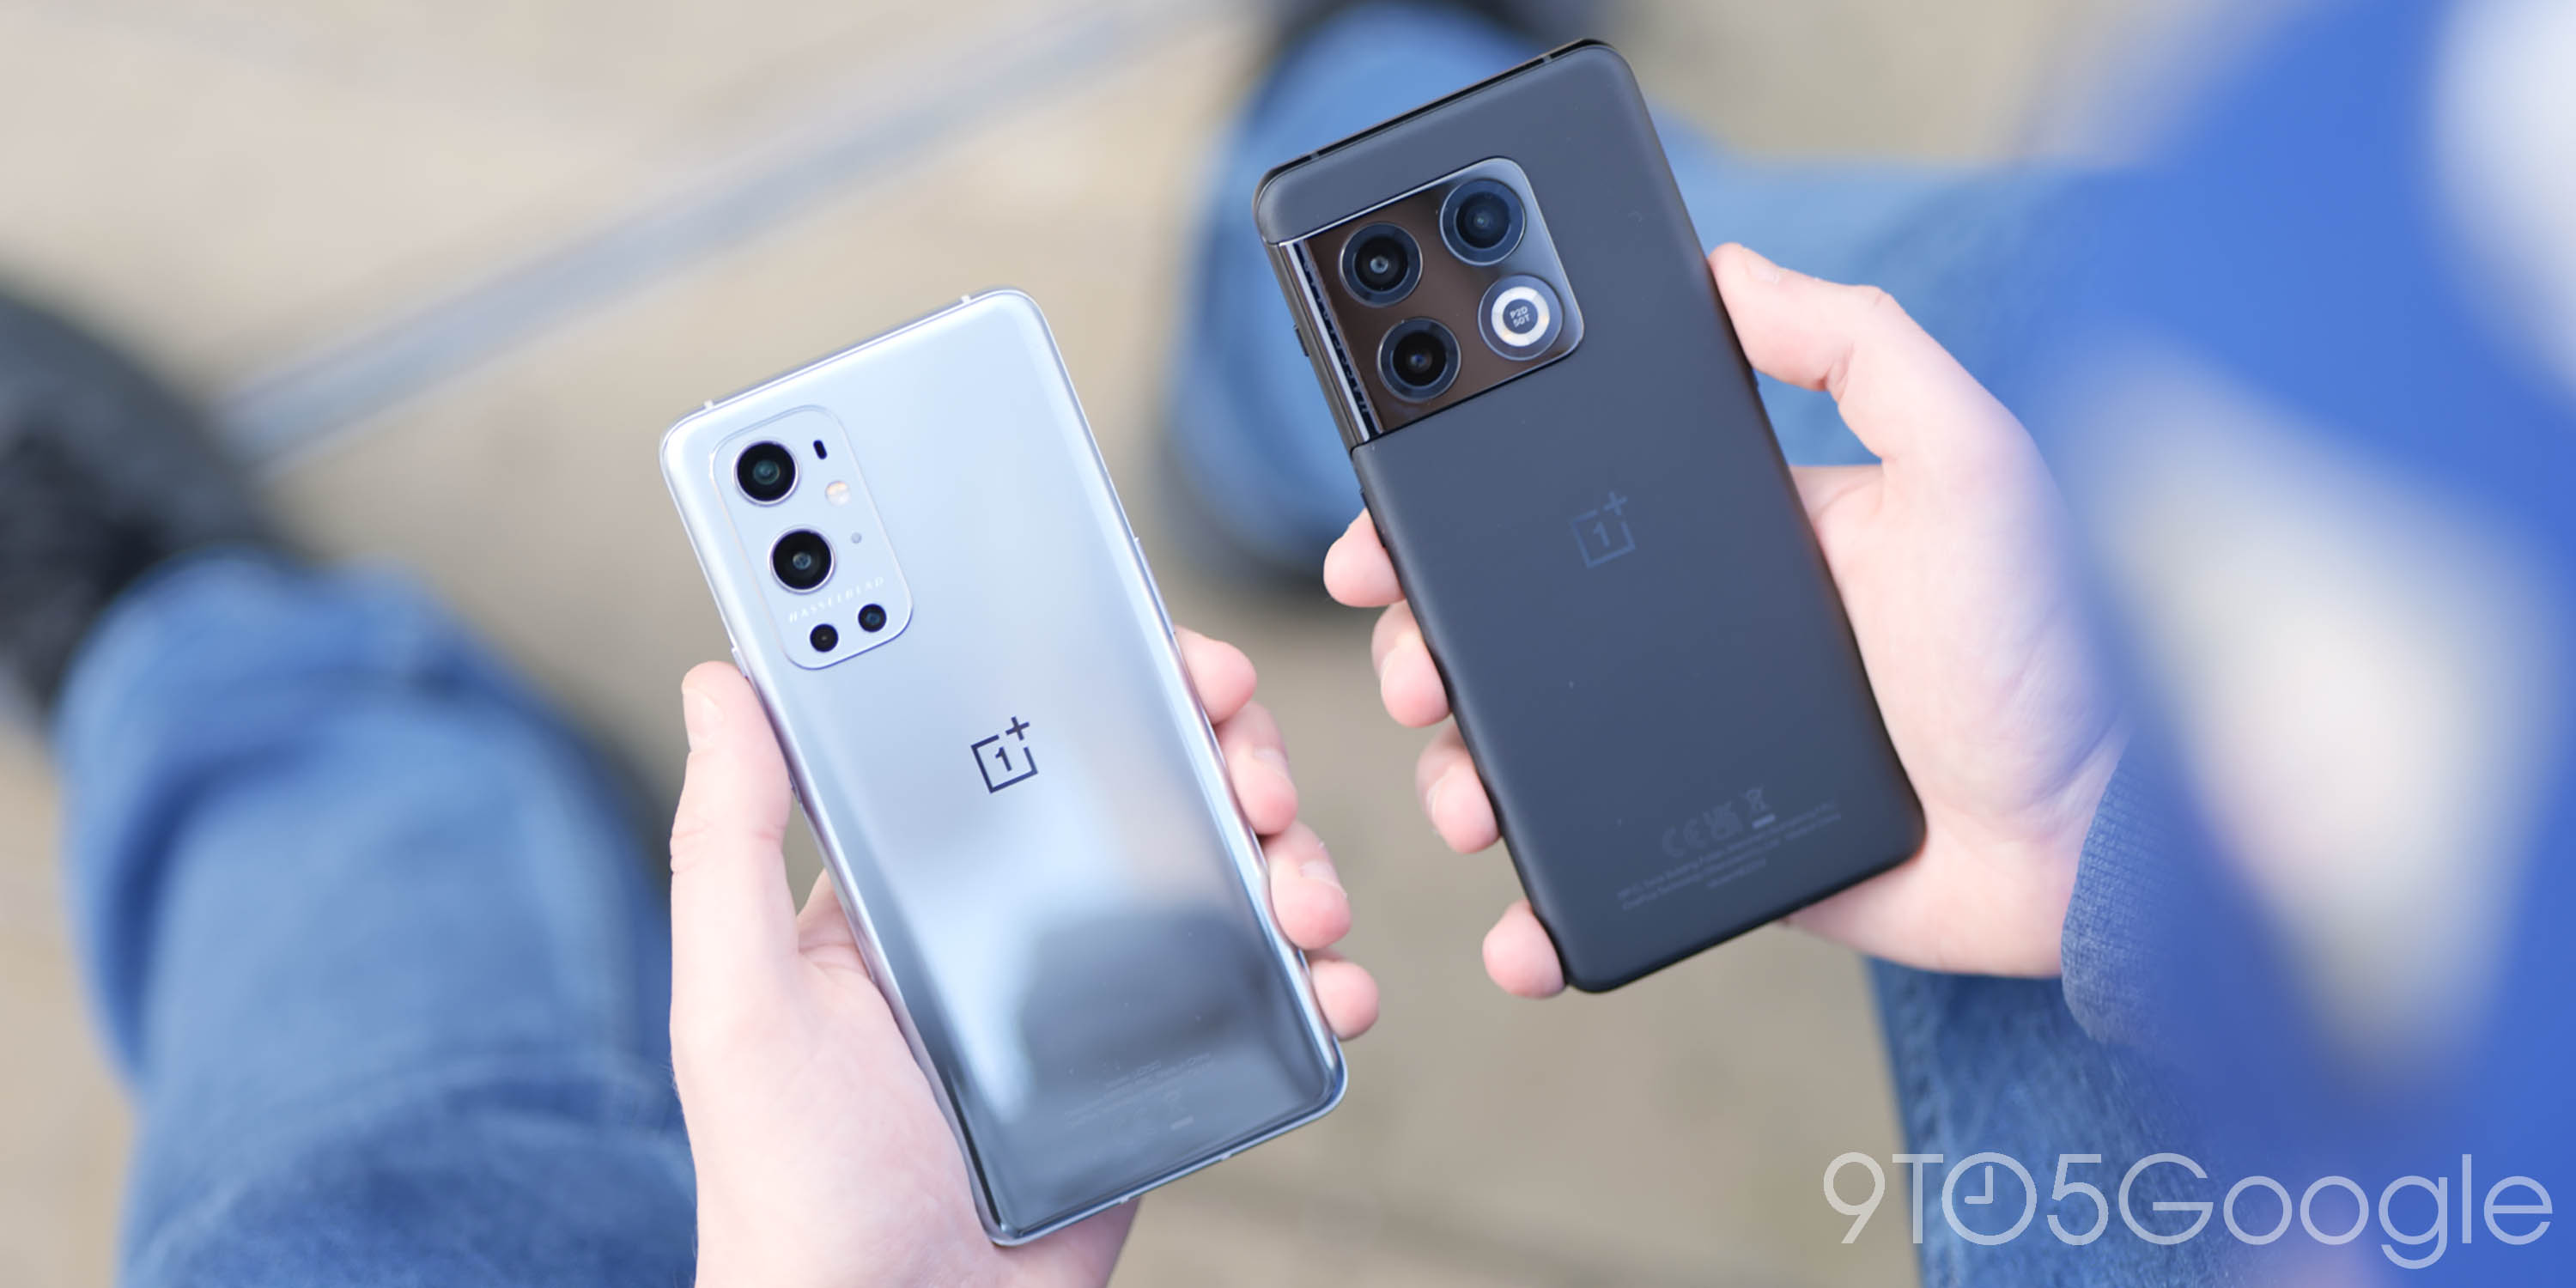 https://9to5google.com/wp-content/uploads/sites/4/2022/03/OnePlus-9-Pro-and-OnePlus-10-Pro-18.jpg?quality=82&strip=all